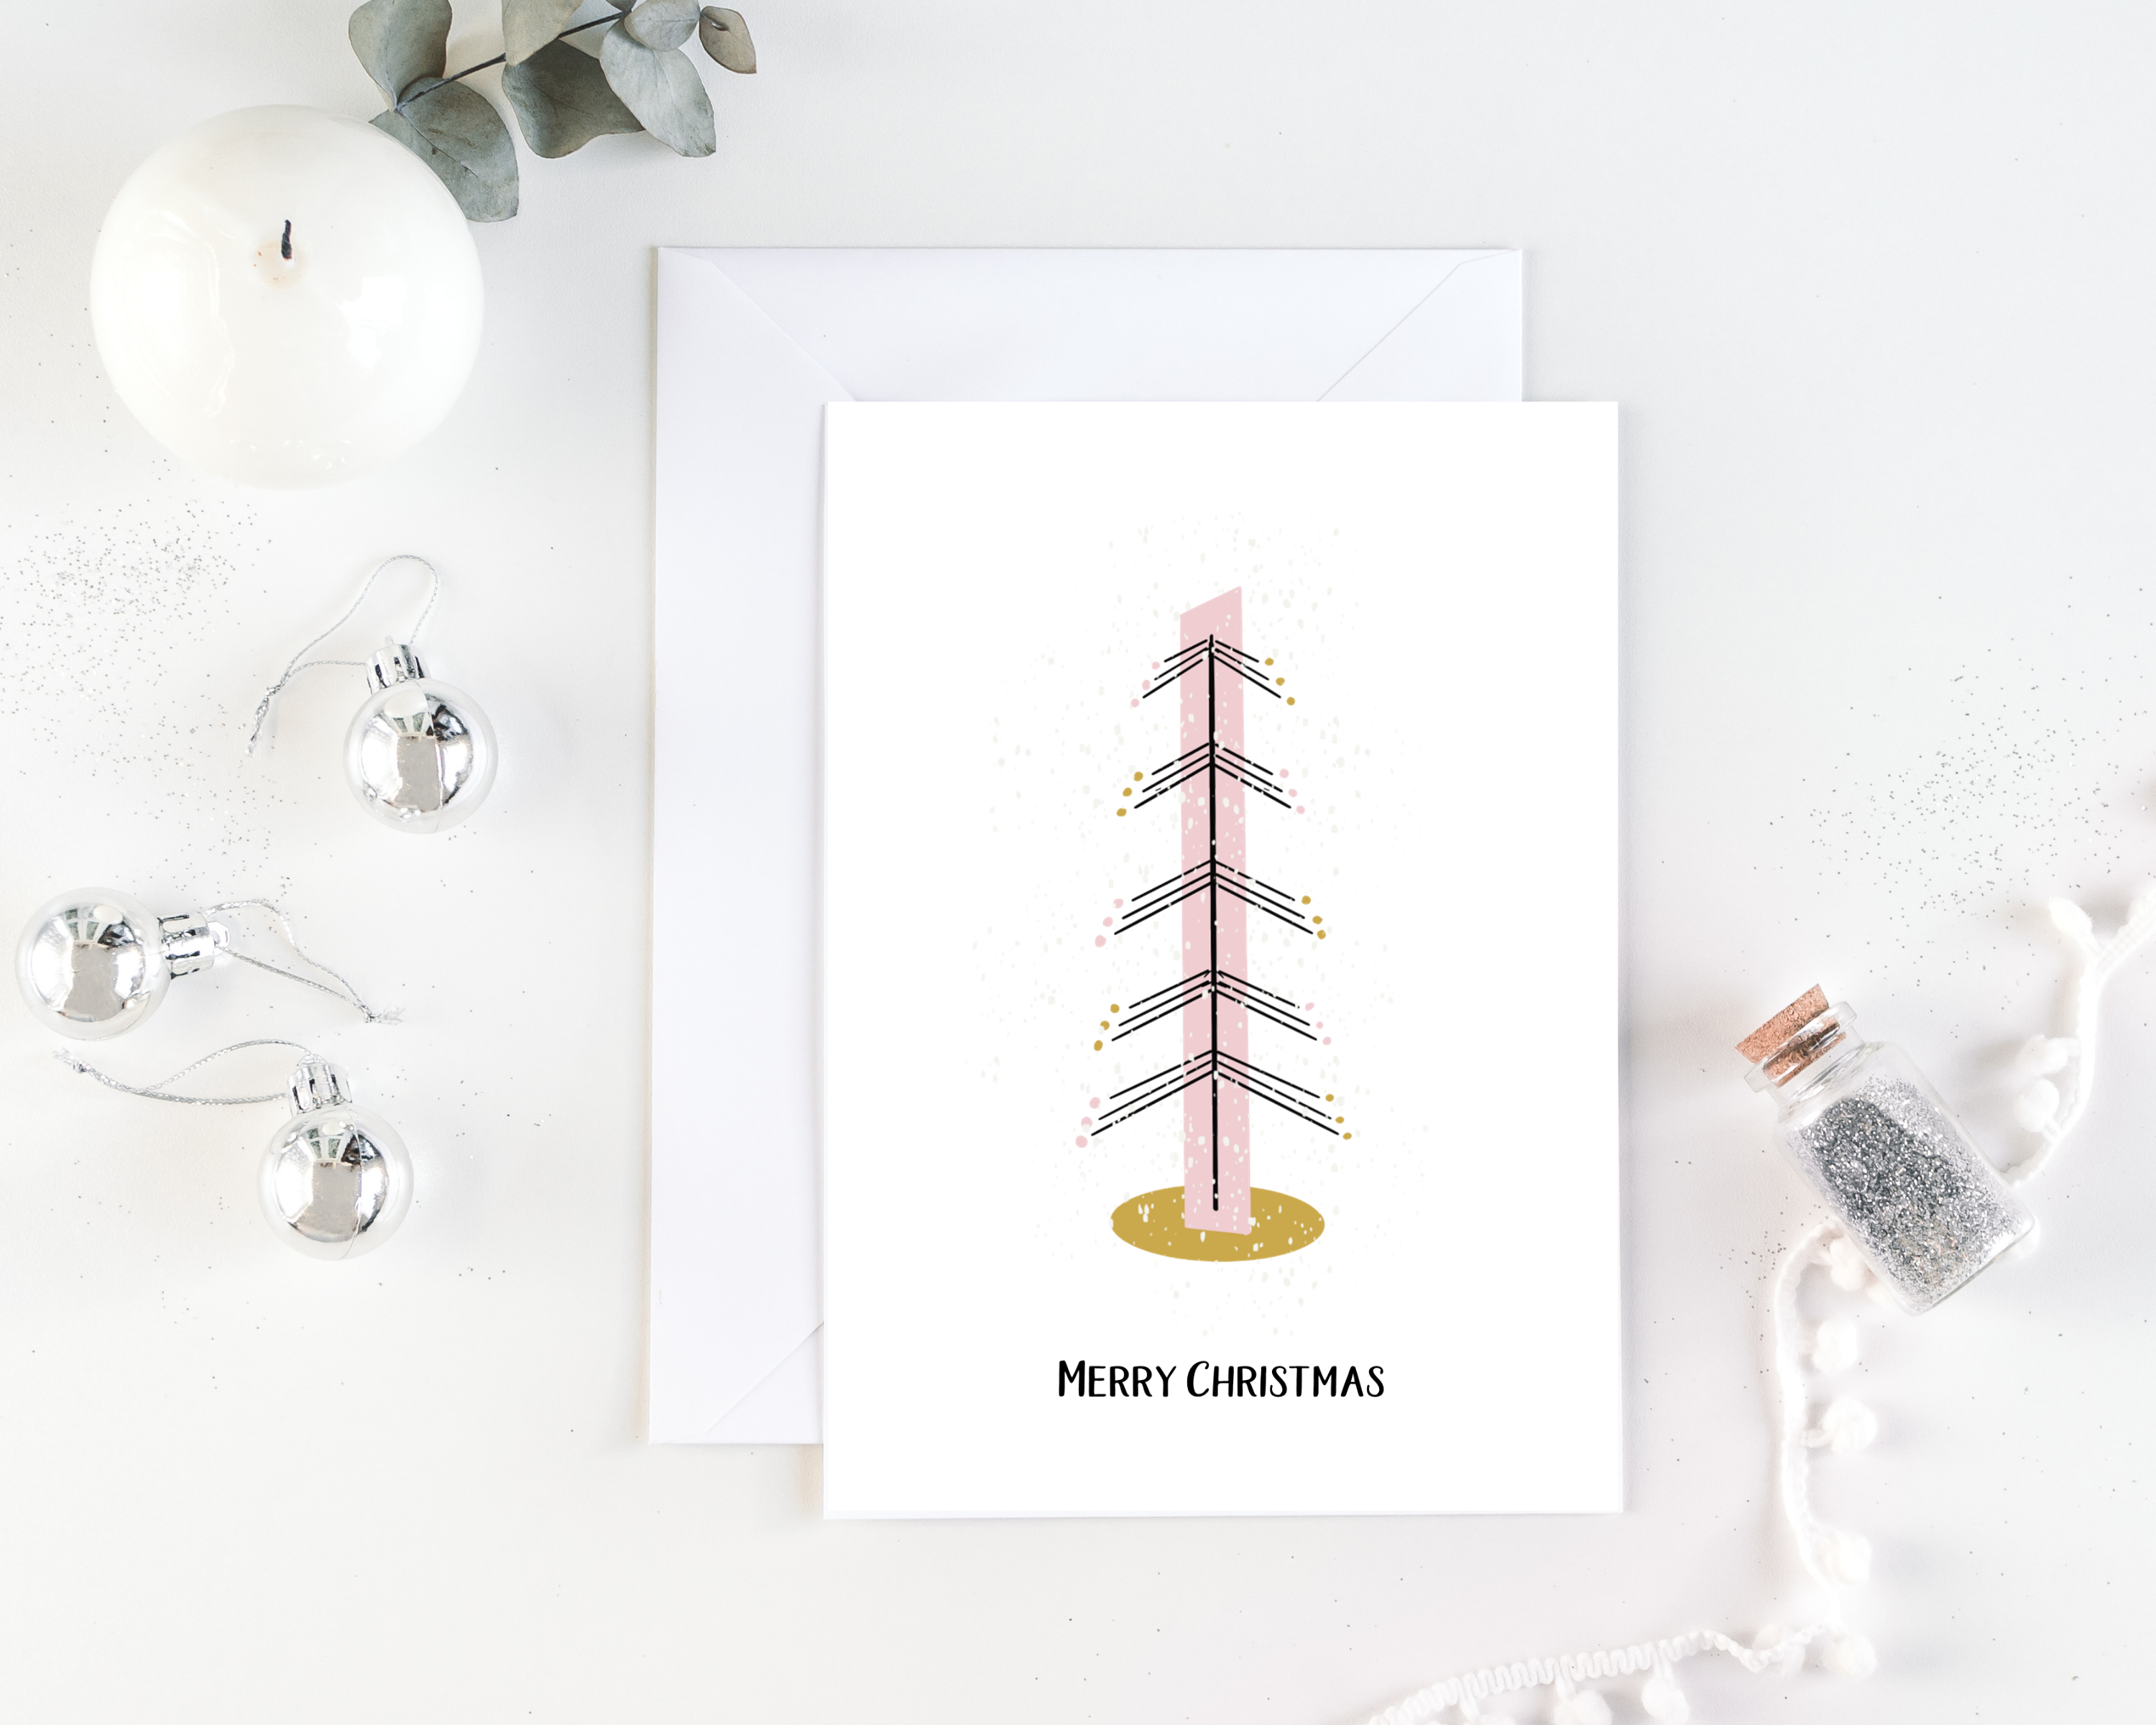 Tree Design of Poppleberry A6 Abstract, Blush Pink & Gold Christmas Cards on White Cardstock and White Envelope.